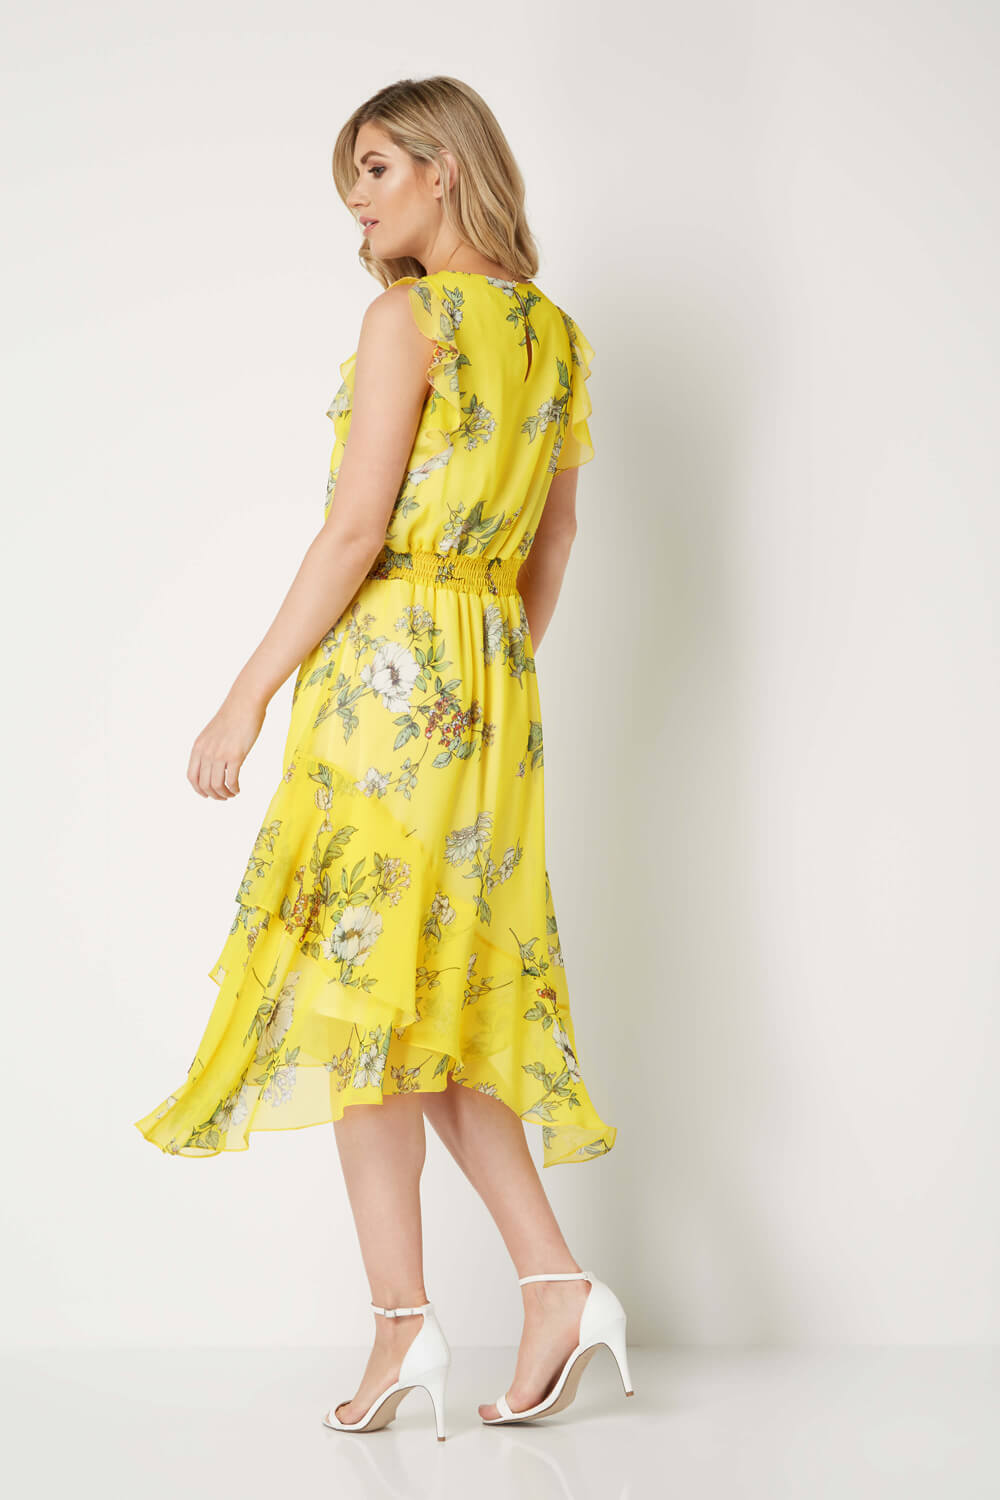 Yellow Floral Frill Midi Dress, Image 4 of 5